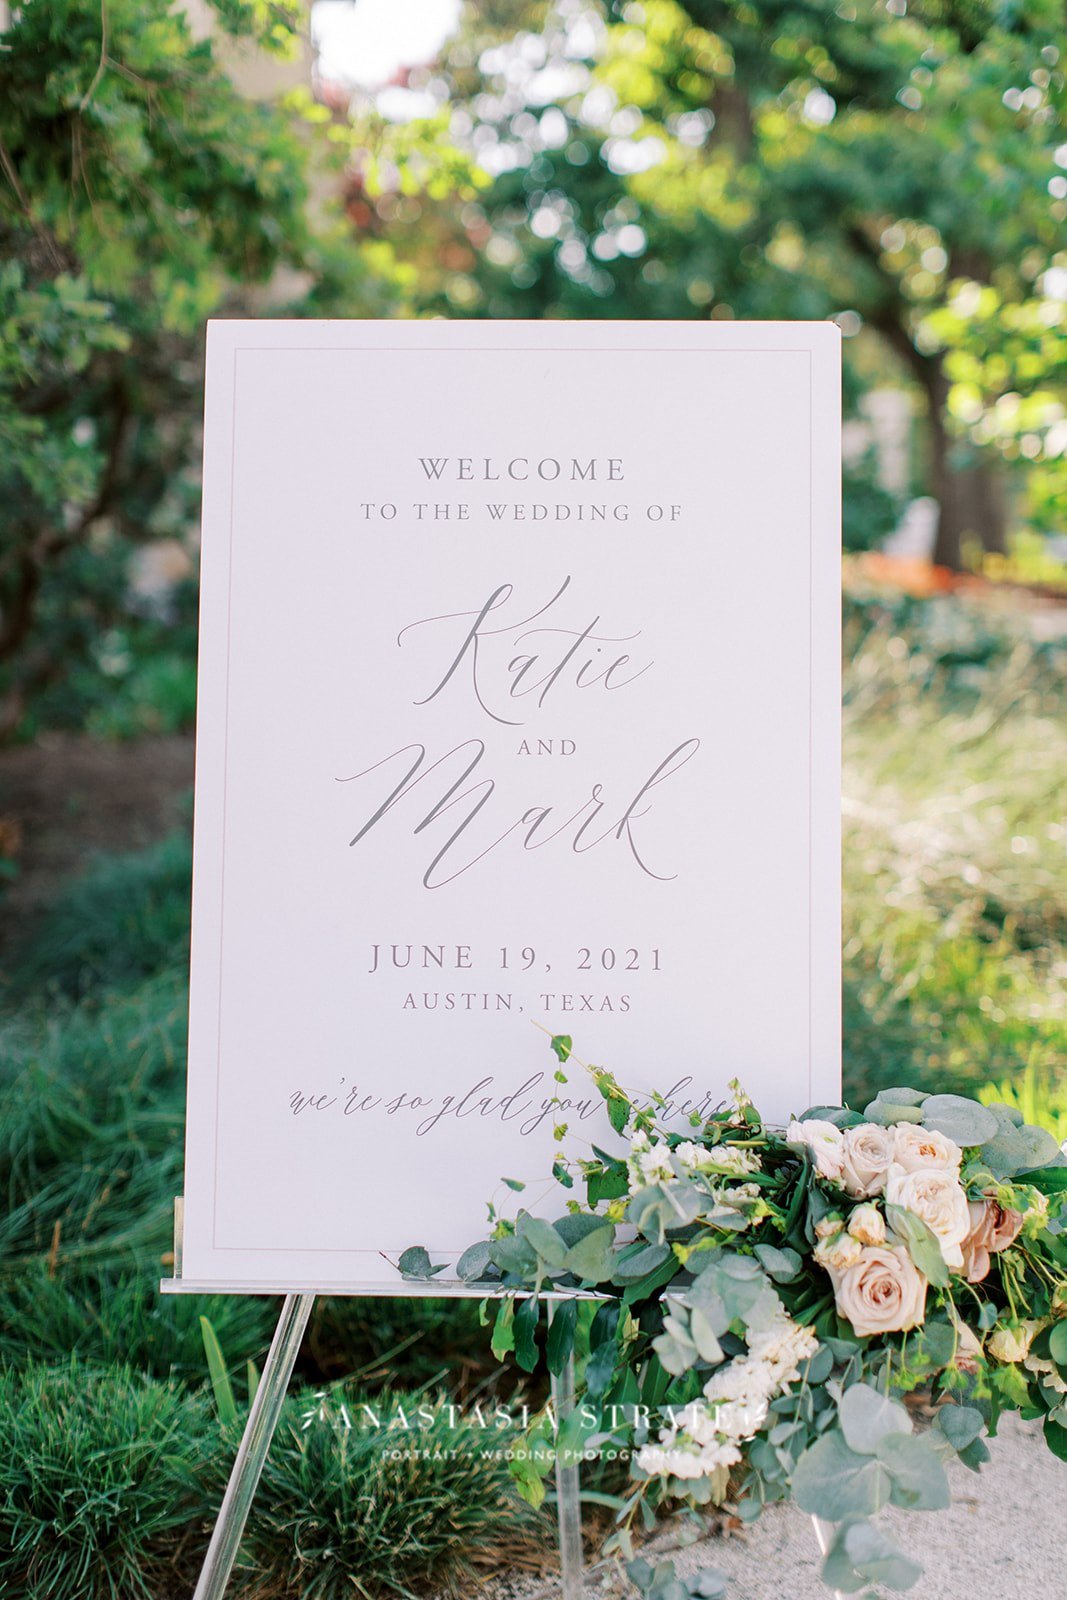 Pink-Champagne-Designs-wedding-welcome-signs